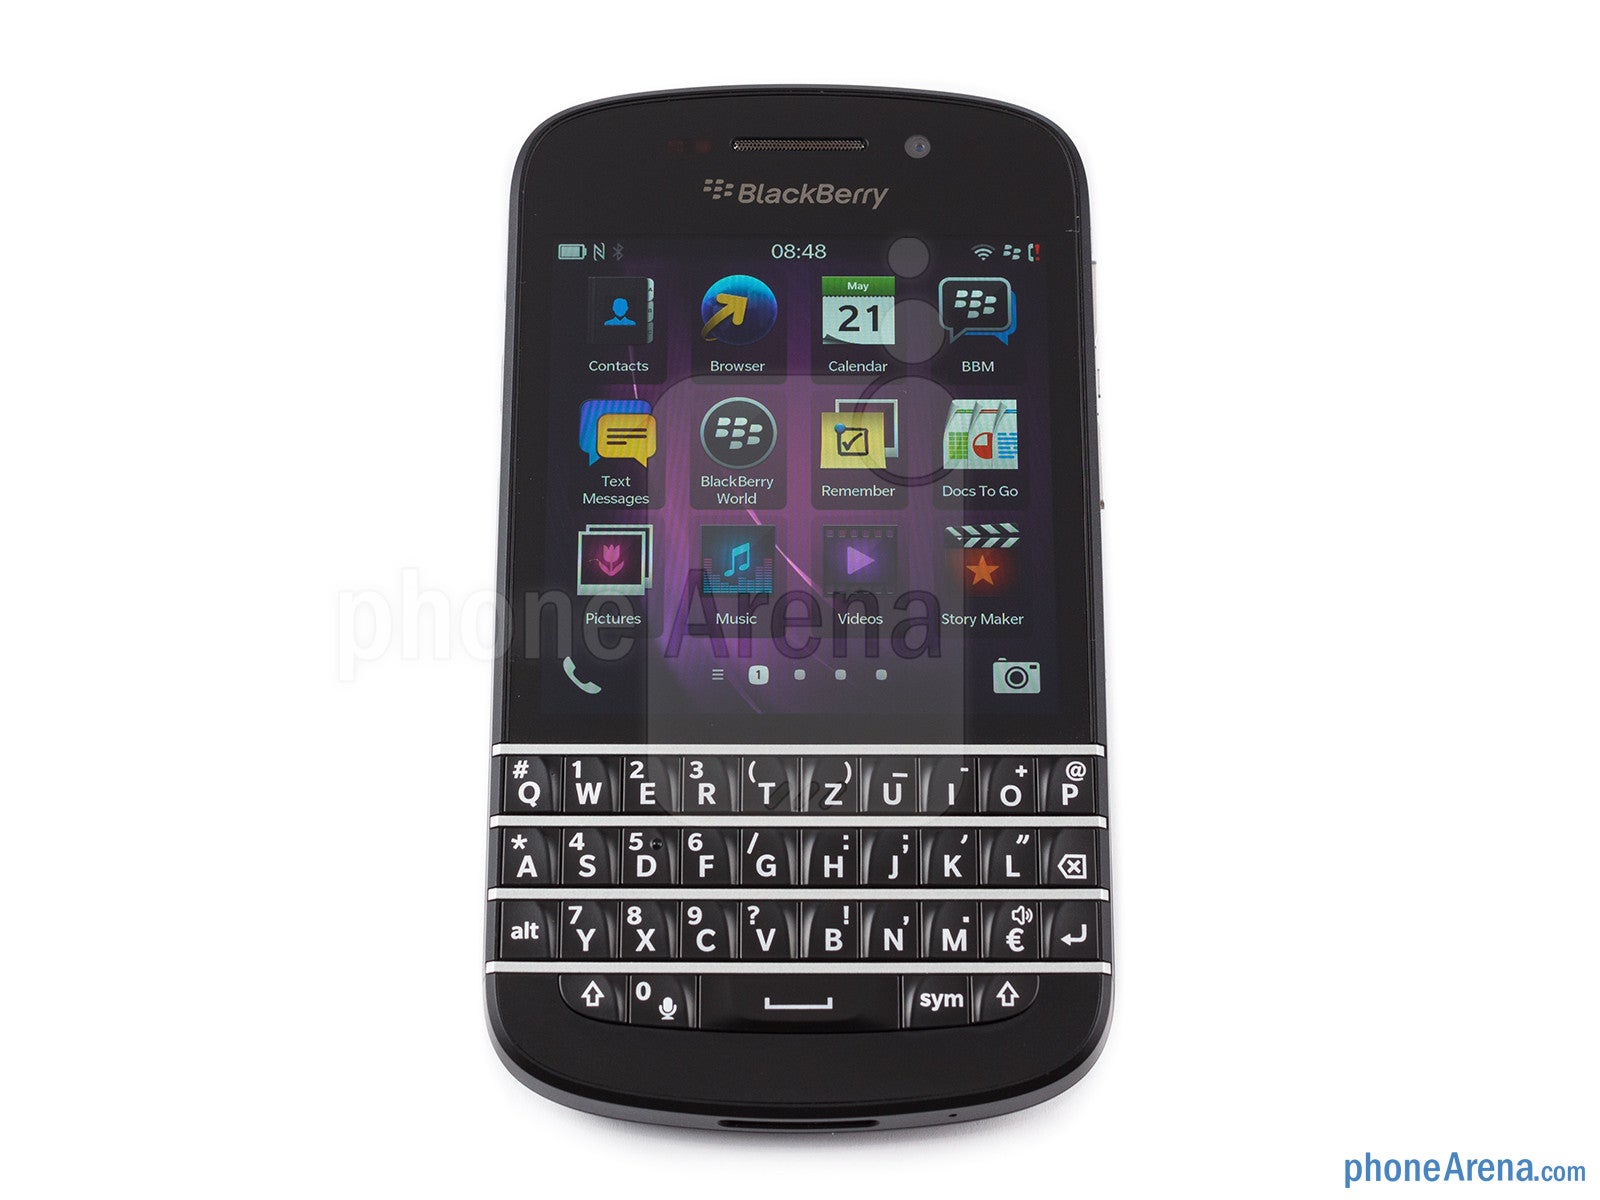 The 3.1-inch screen is quite small by today's standards - BlackBerry Q10 Review